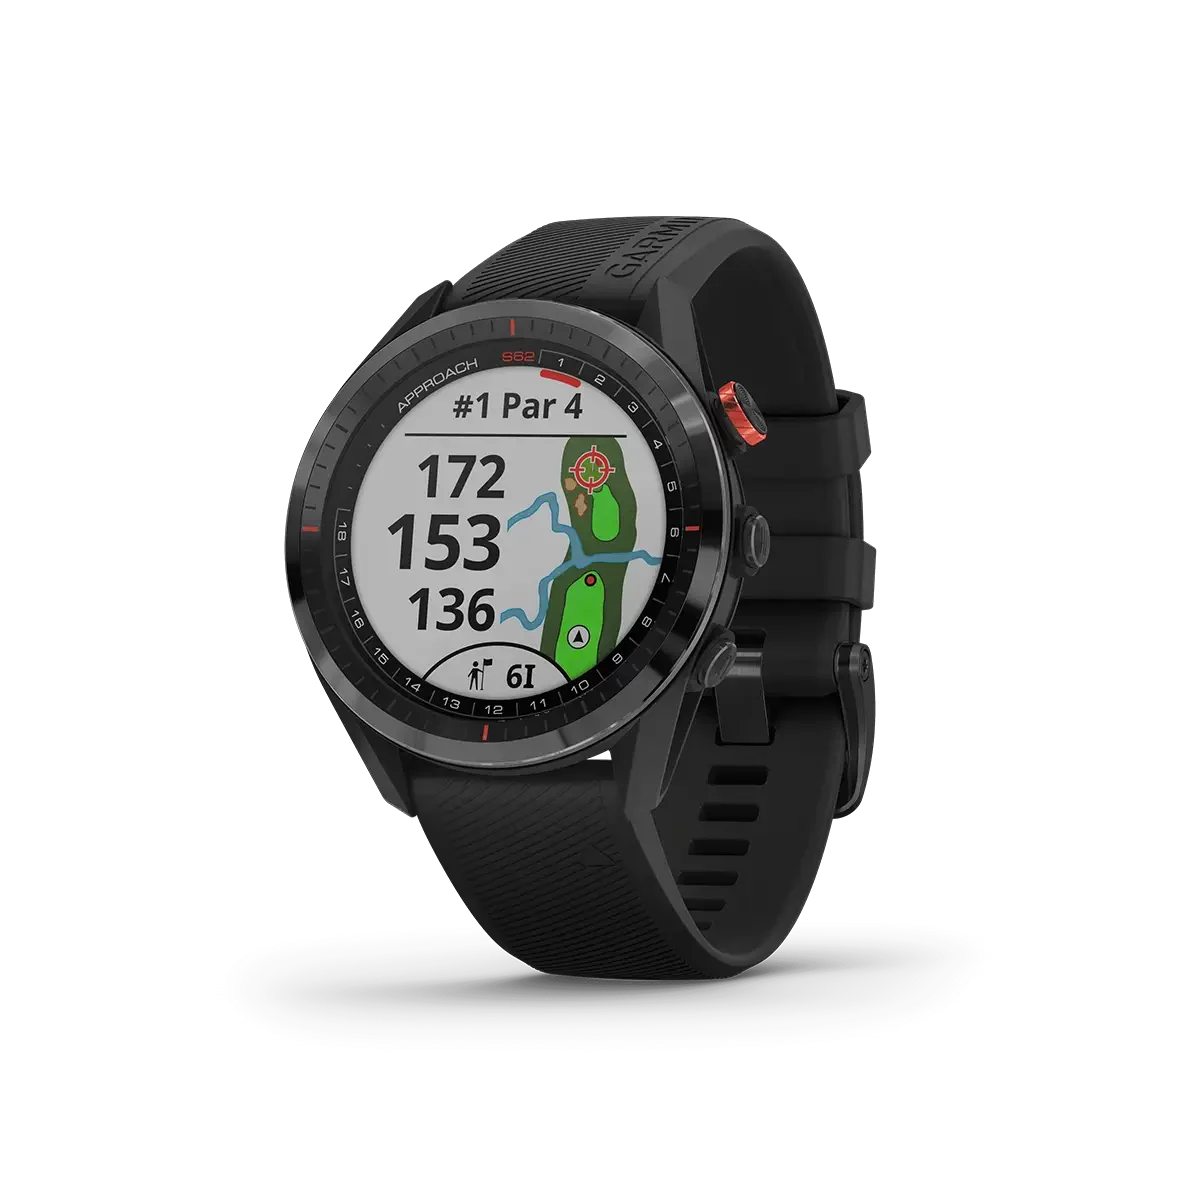 Garmin Approach S62 in black with left hand view